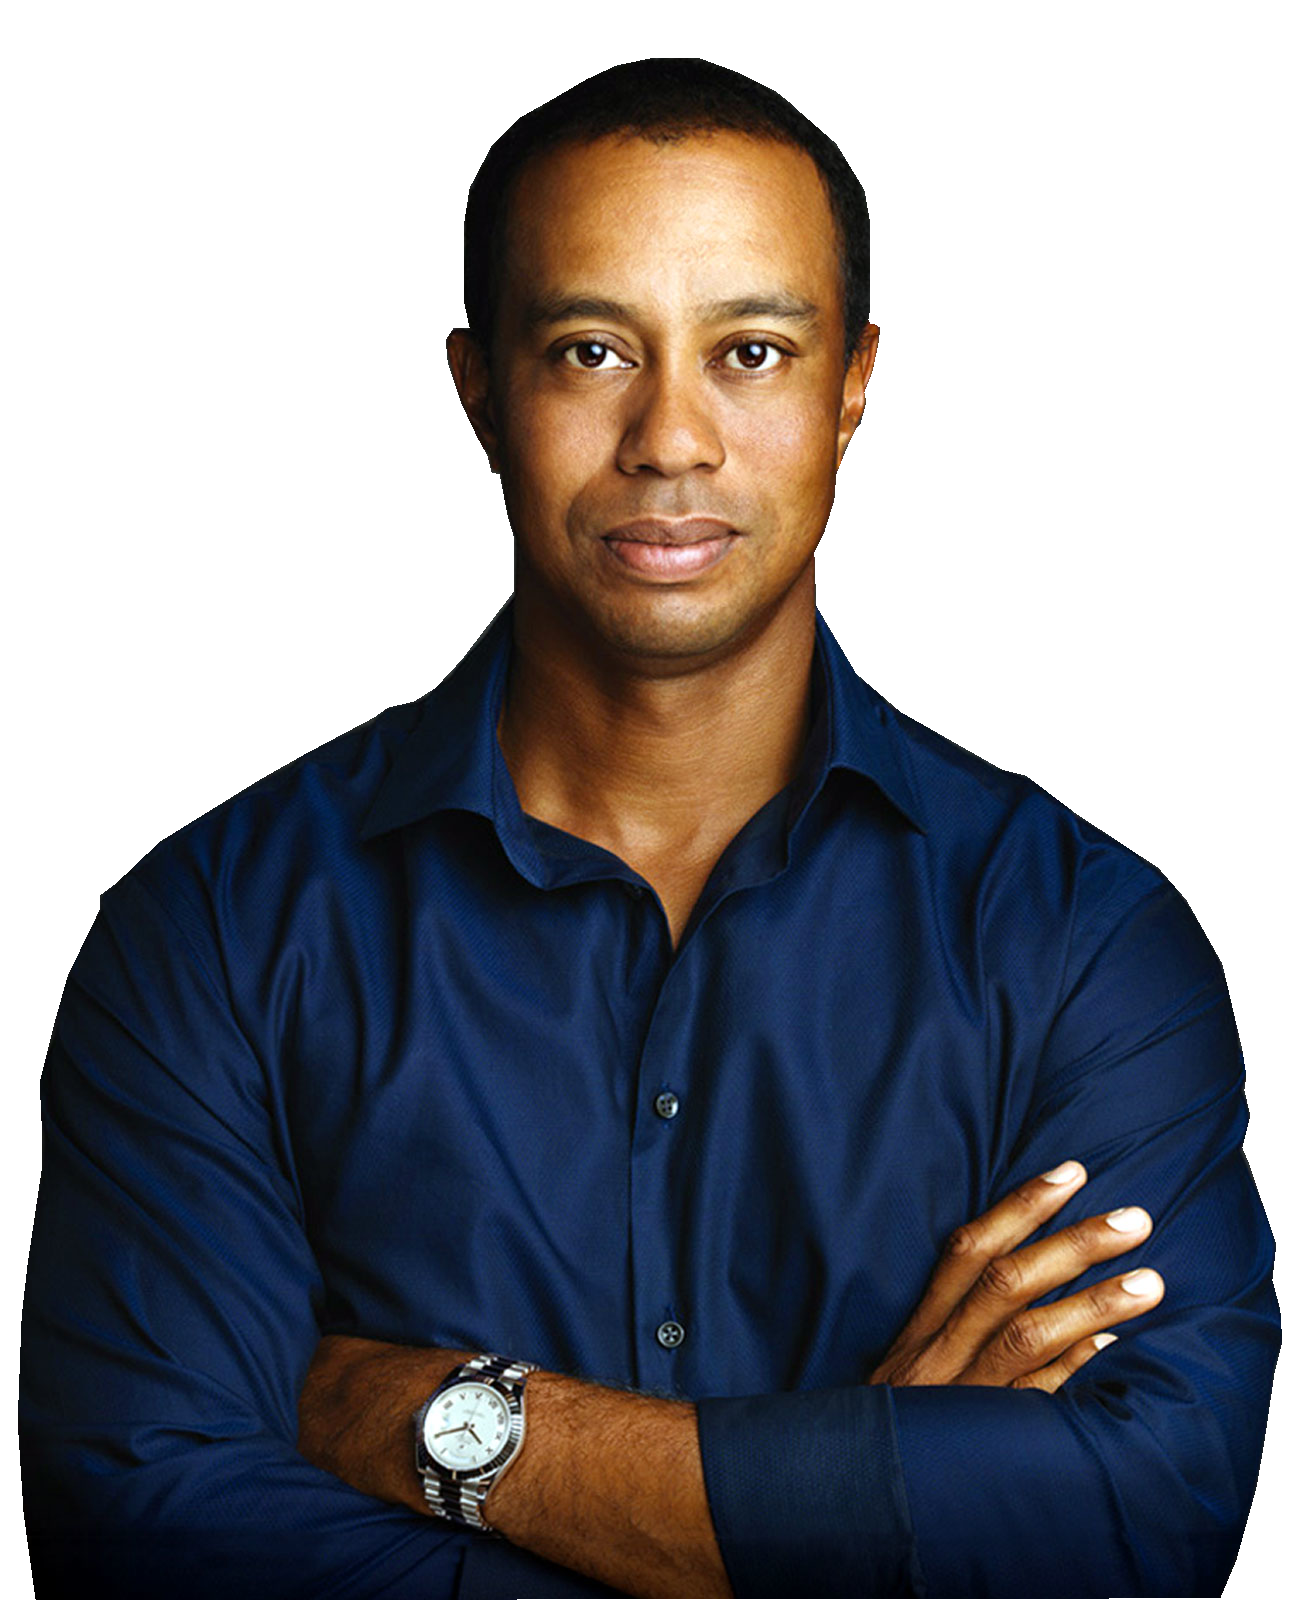 Rumour Mill Spinning As "Massive" Statement From Tiger Woods Expected